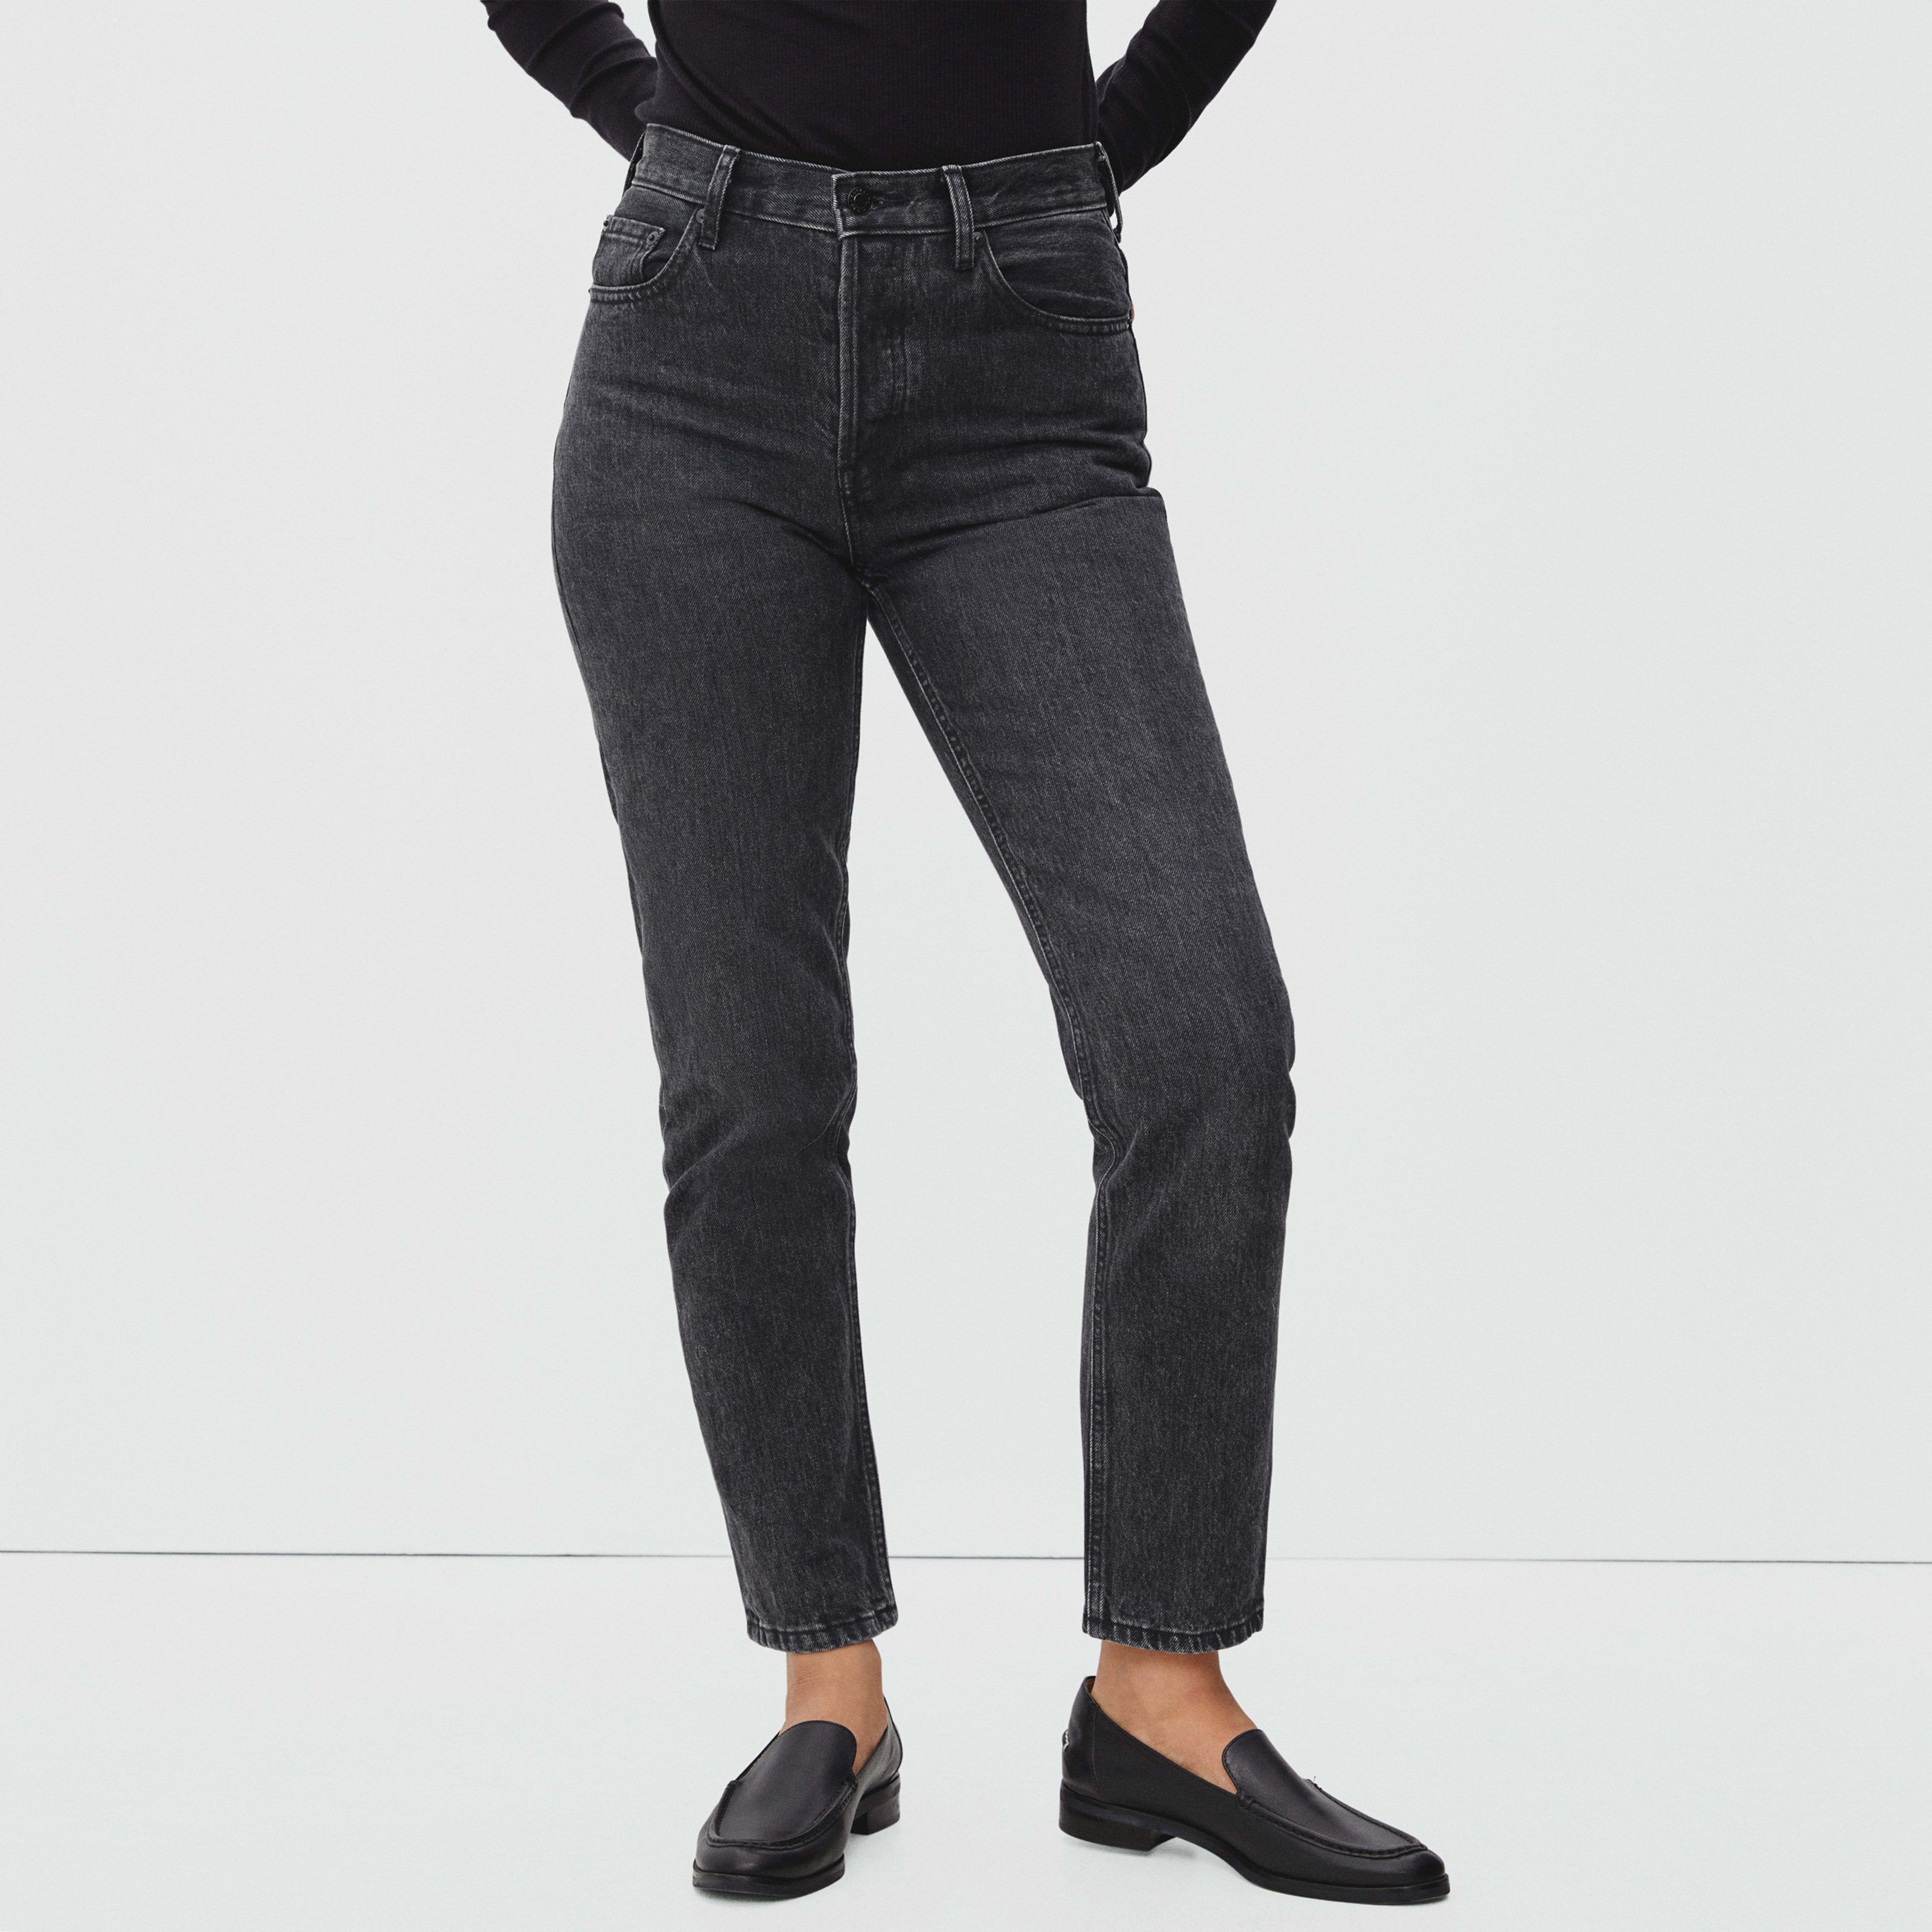 Women's '90s Cheeky Jean by Everlane in Washed Black, Size 23 | Everlane